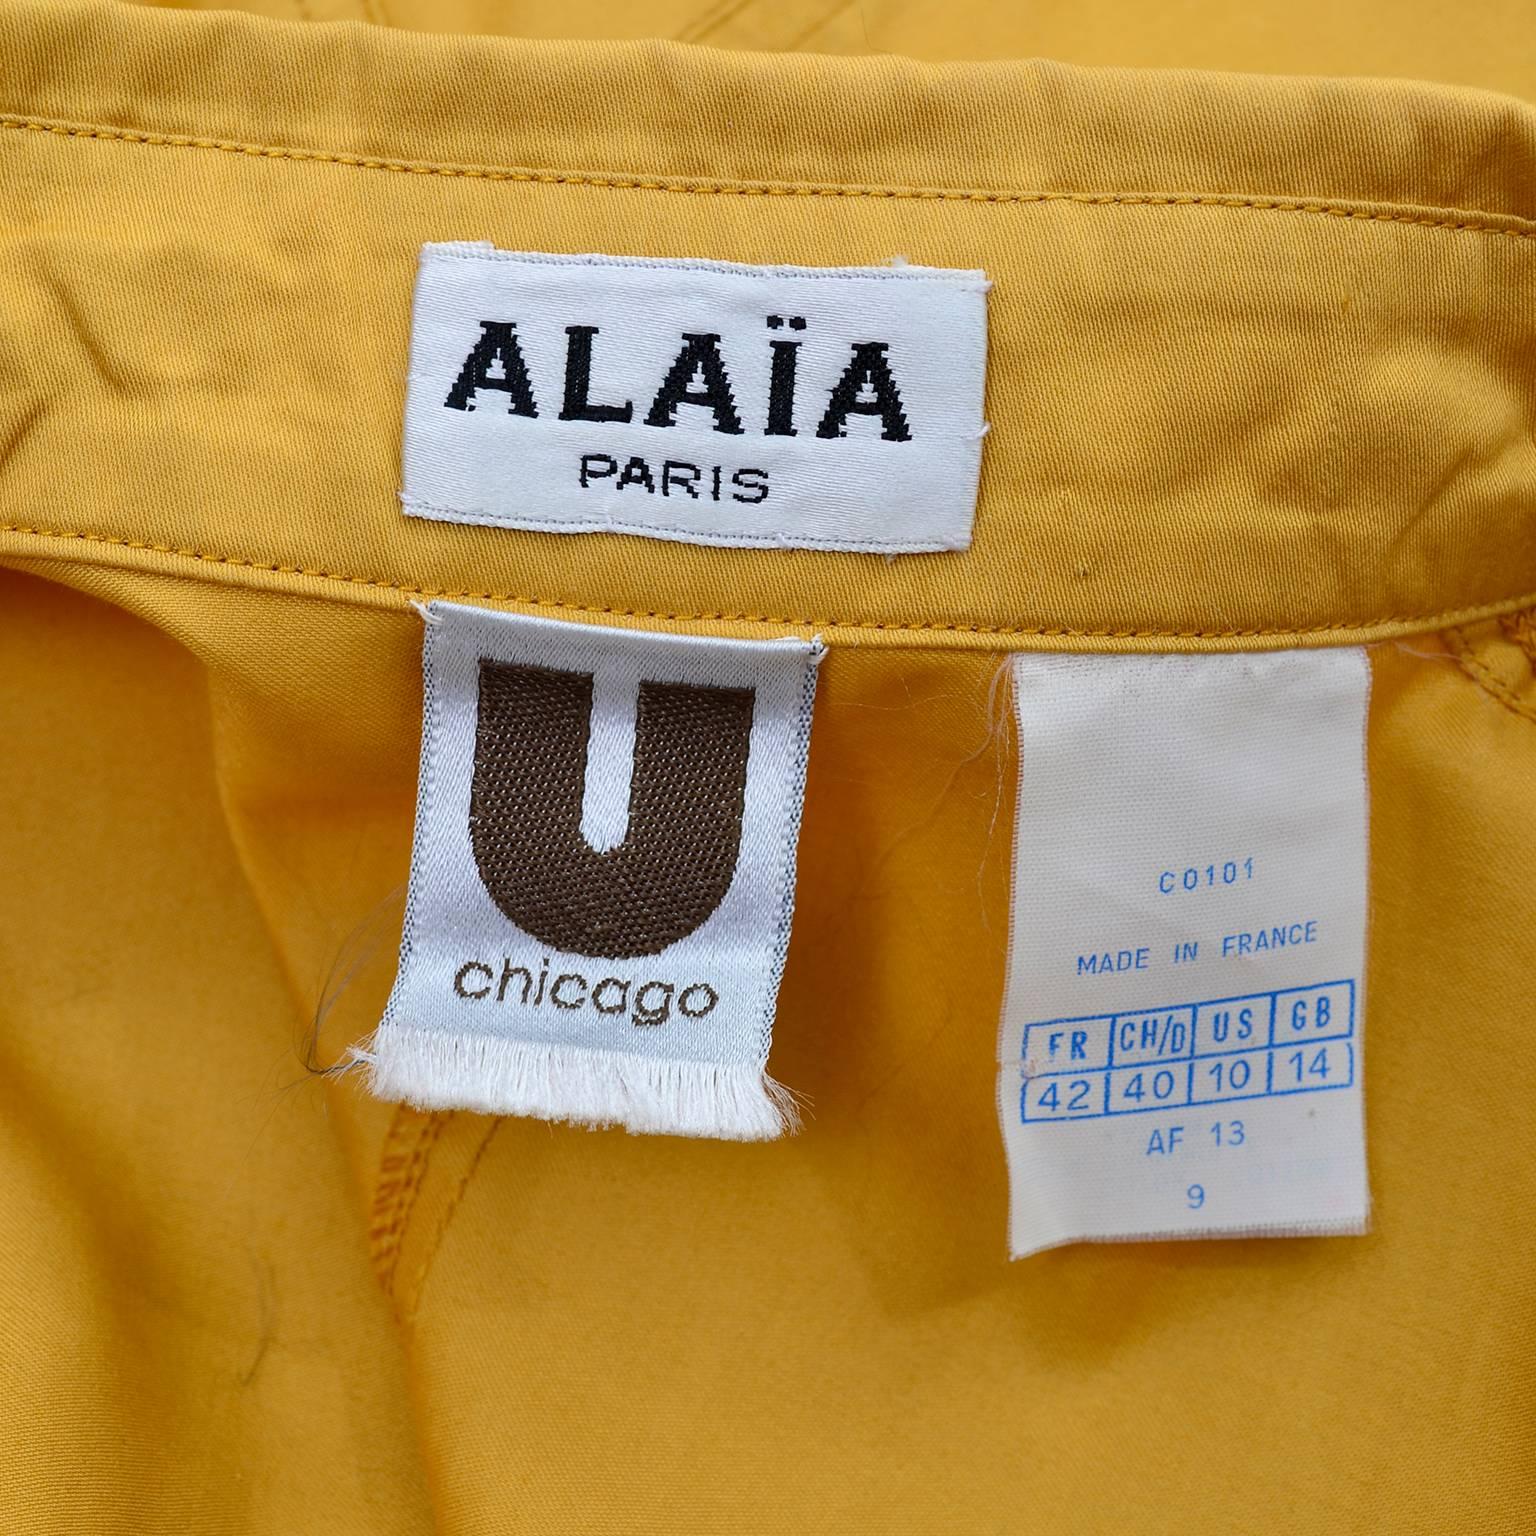 1980s Alaia Vintage Mustard Marigold Dress With a Full Skirt Size 10 French 42 5